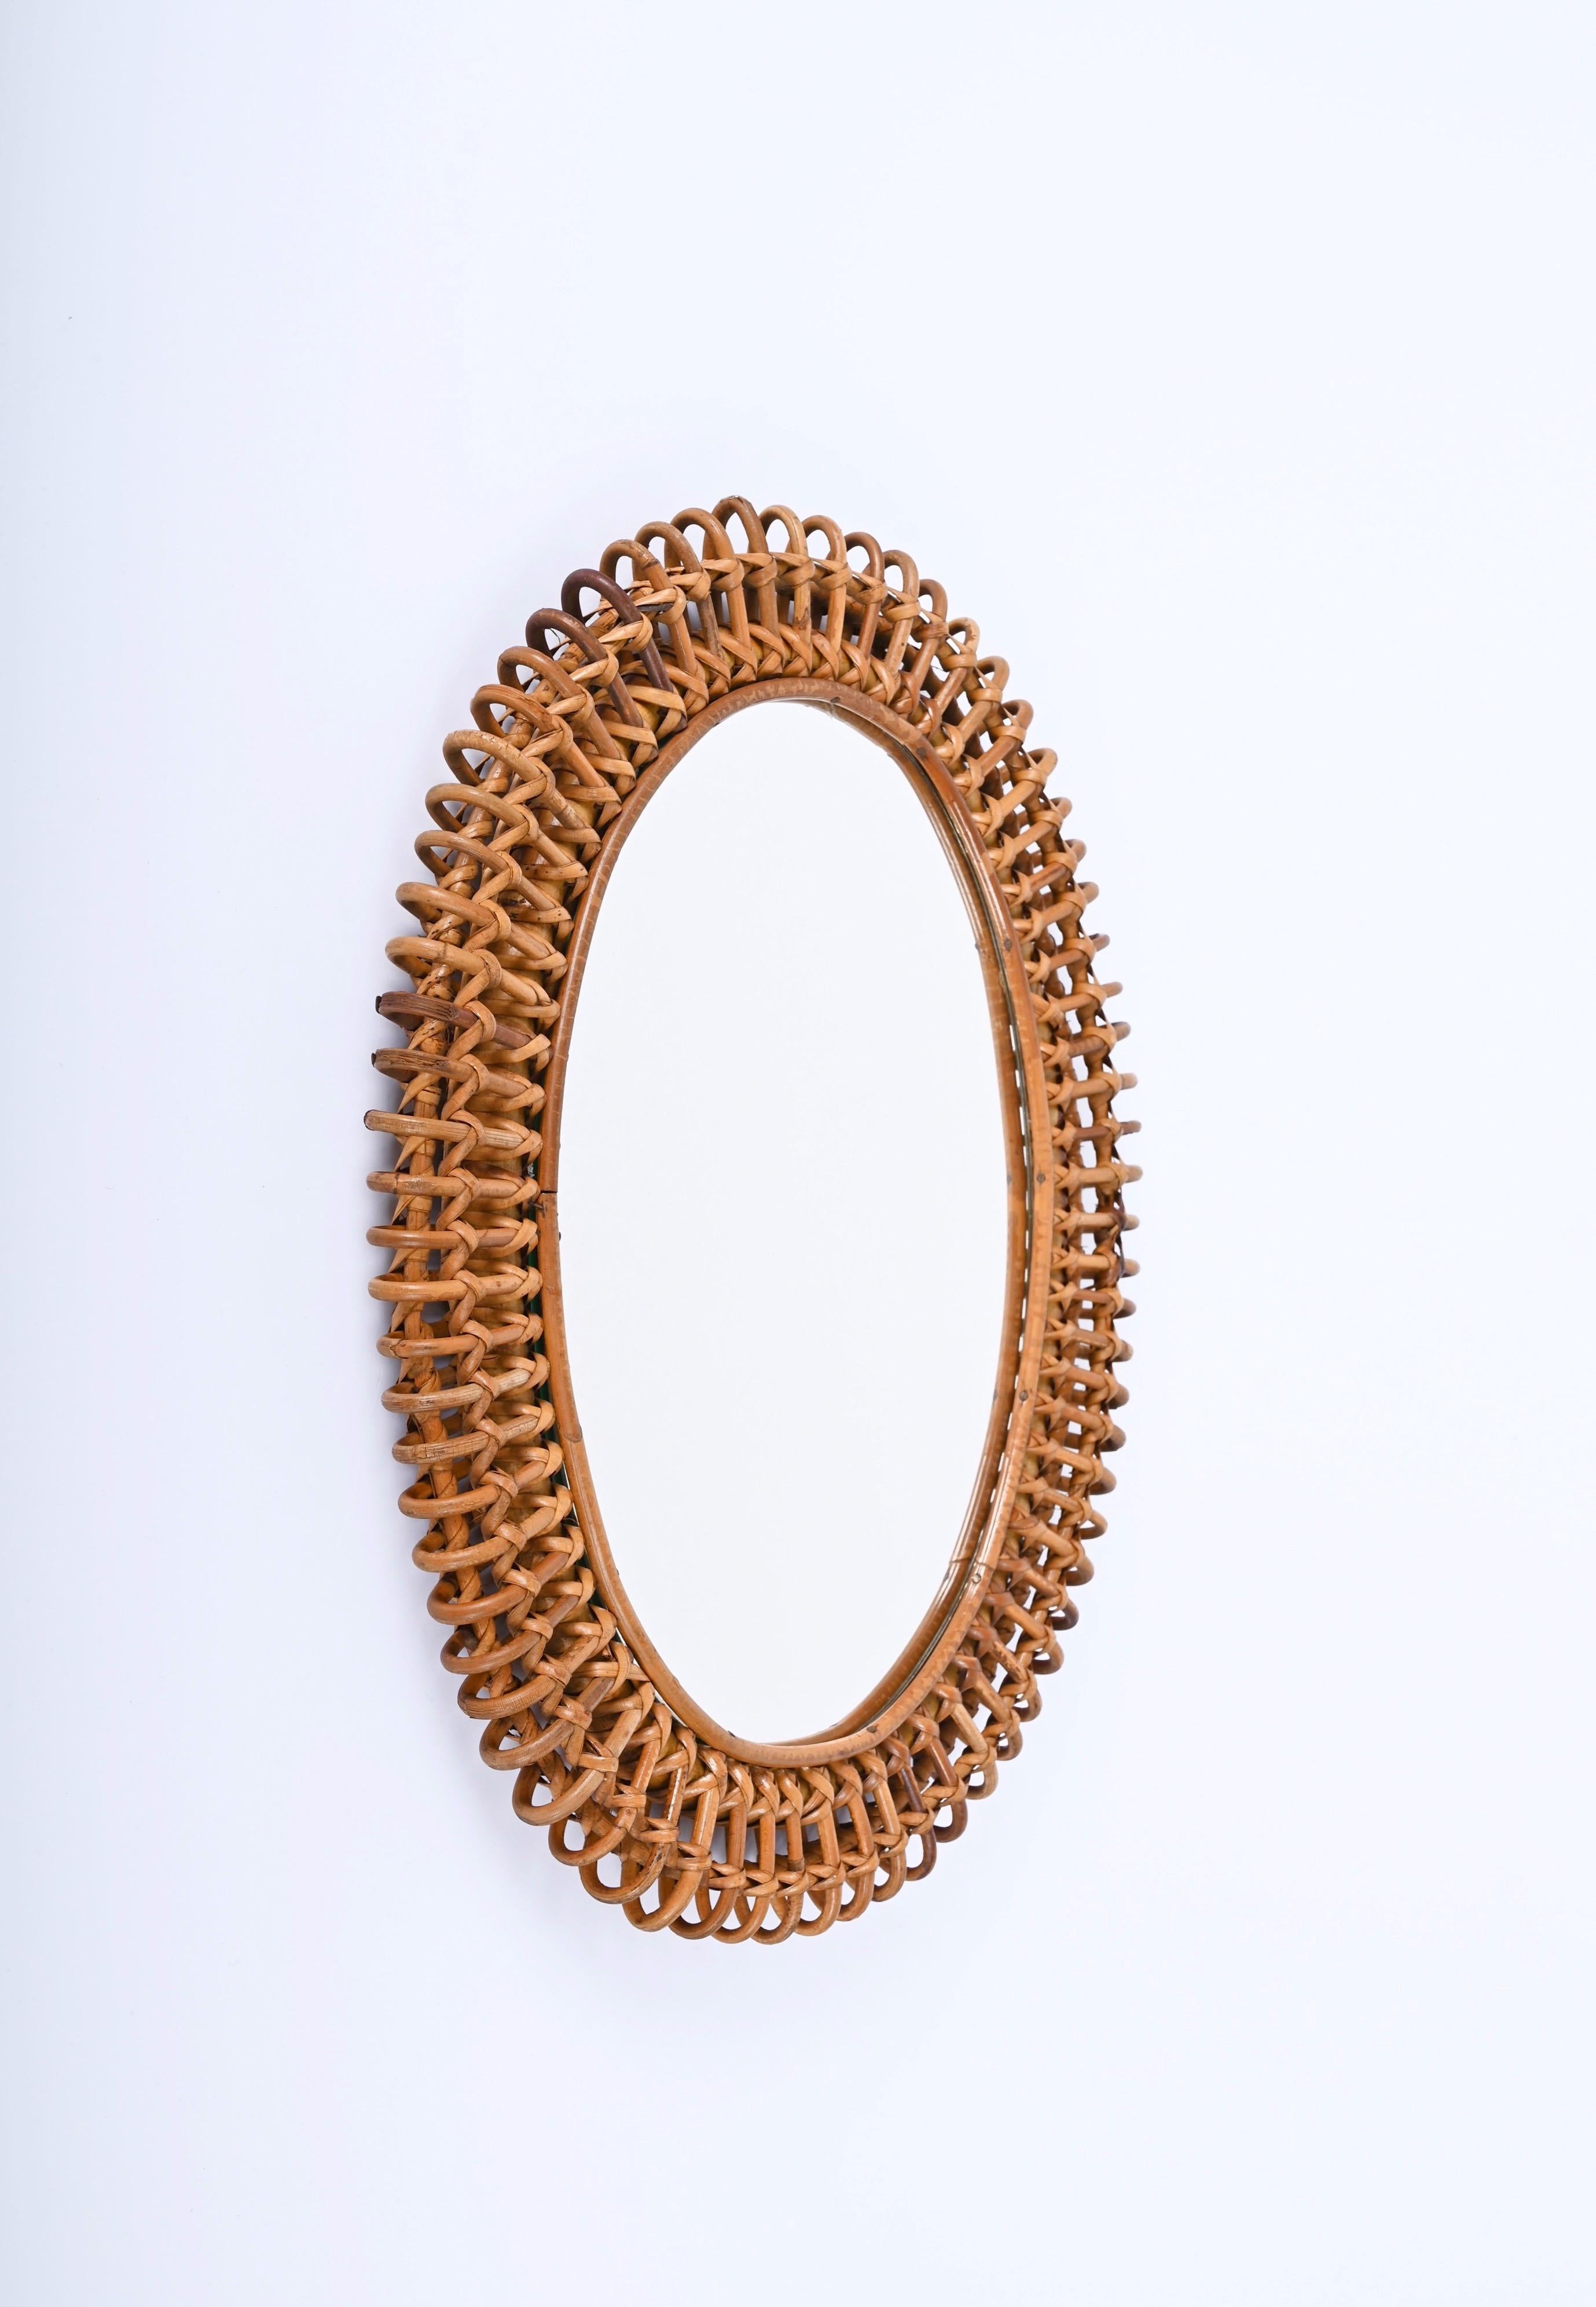 Fantastic Cote d'Azur mid-century oval wall mirror in bamboo, rattan and wicker. This astonishing piece was produced in Italy during the 1960s, and it is attributed to the mastery of Franco Albini.

This wonderful mirror features a double frame in